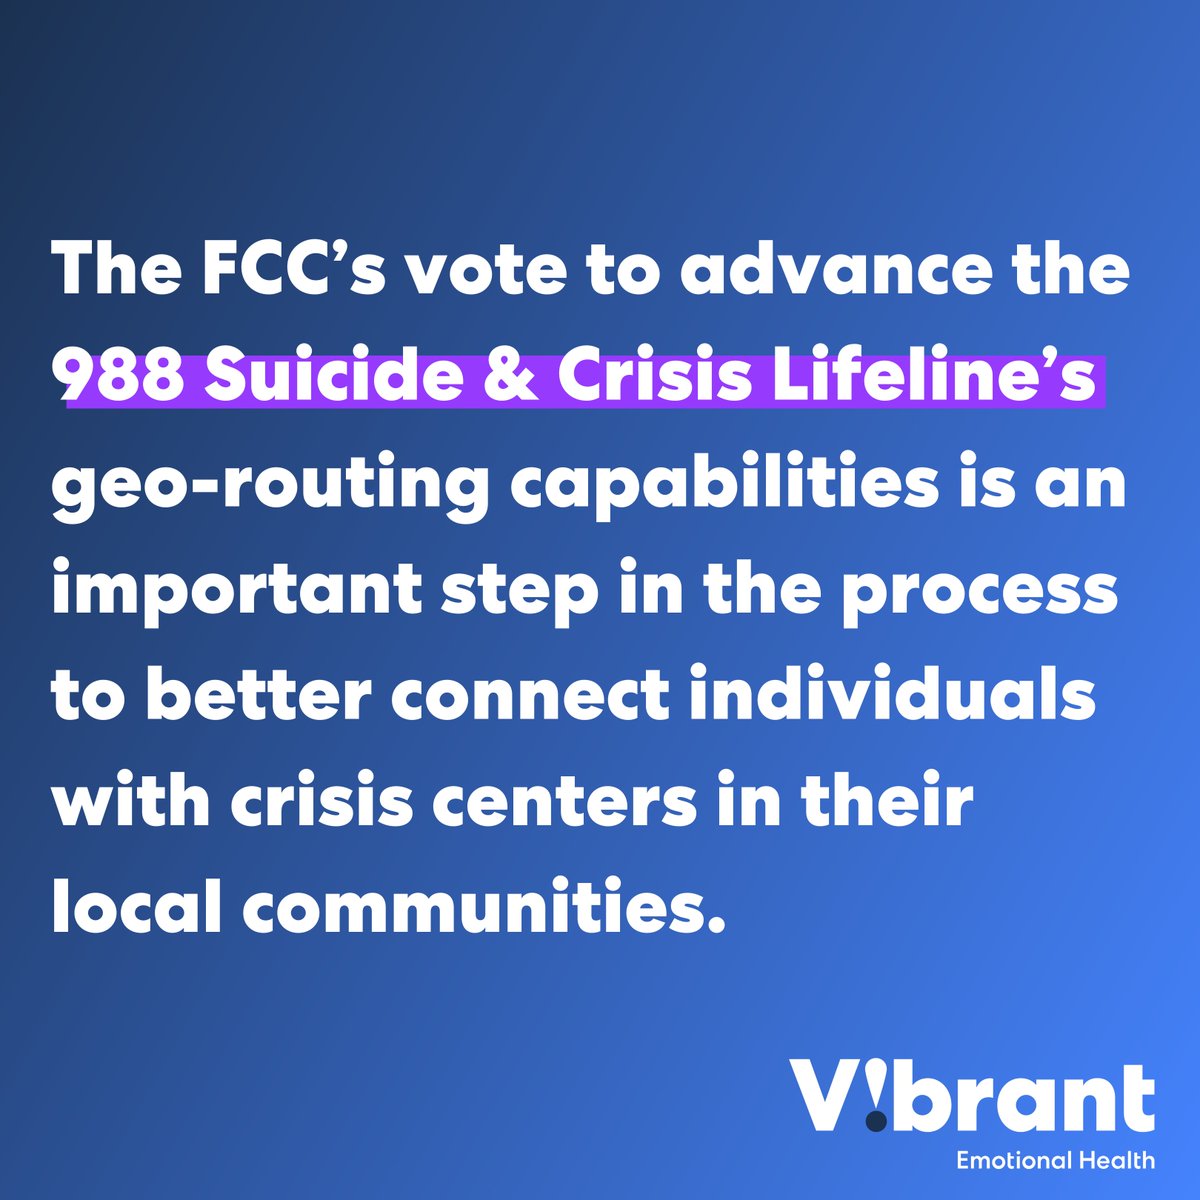 Vibrant applauds the @FCC for voting to advance rule making for geo-routing capabilities for the @988lifeline. We look forward to working with all stakeholders to ensure equitable access to emotional support and #mentalhealth services.